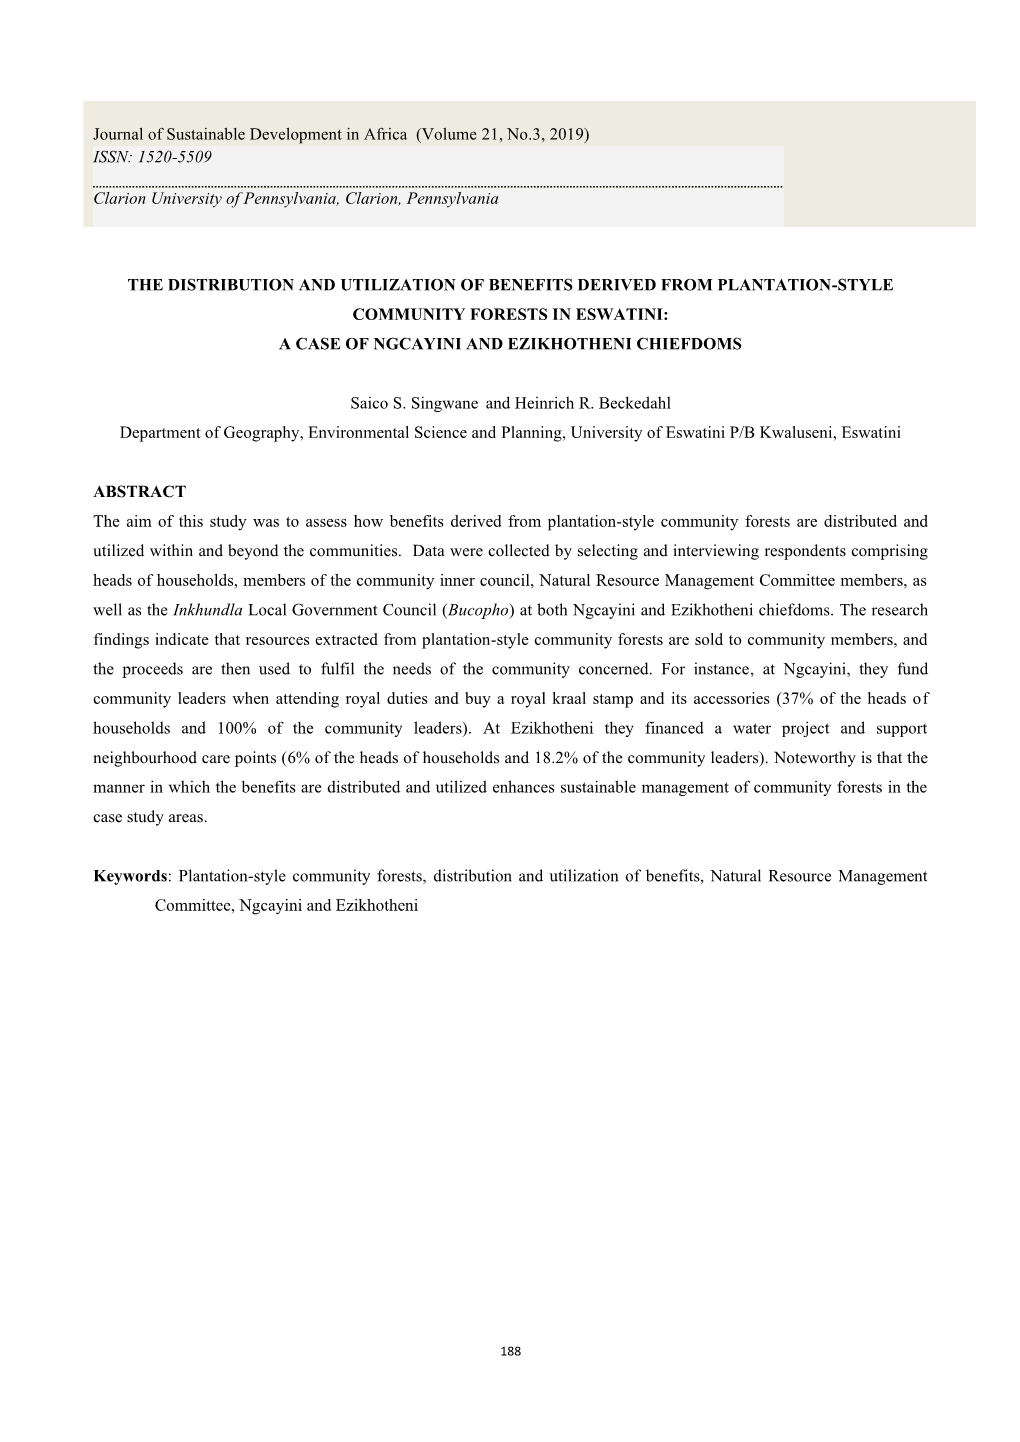 The Distribution and Utilization of Benefits Derived from Plantation-Style Community Forests in Eswatini: a Case of Ngcayini and Ezikhotheni Chiefdoms